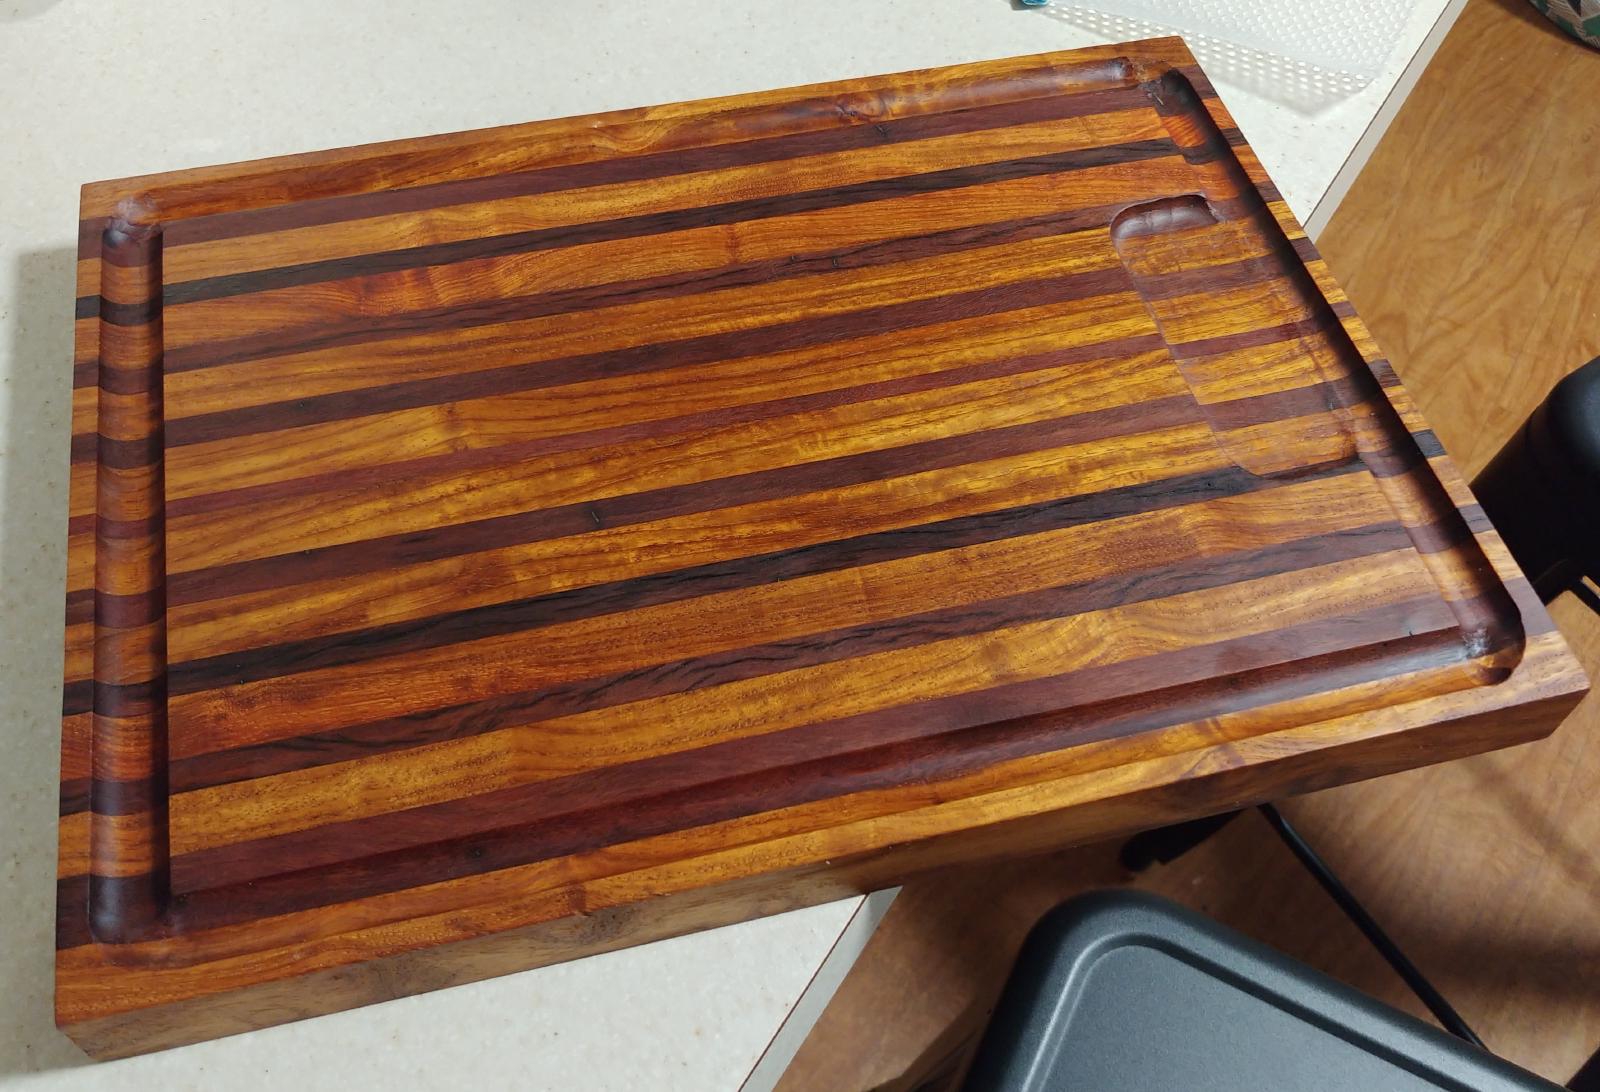 2020 - Cutting board - New Guinea Rosewood & mistery wood